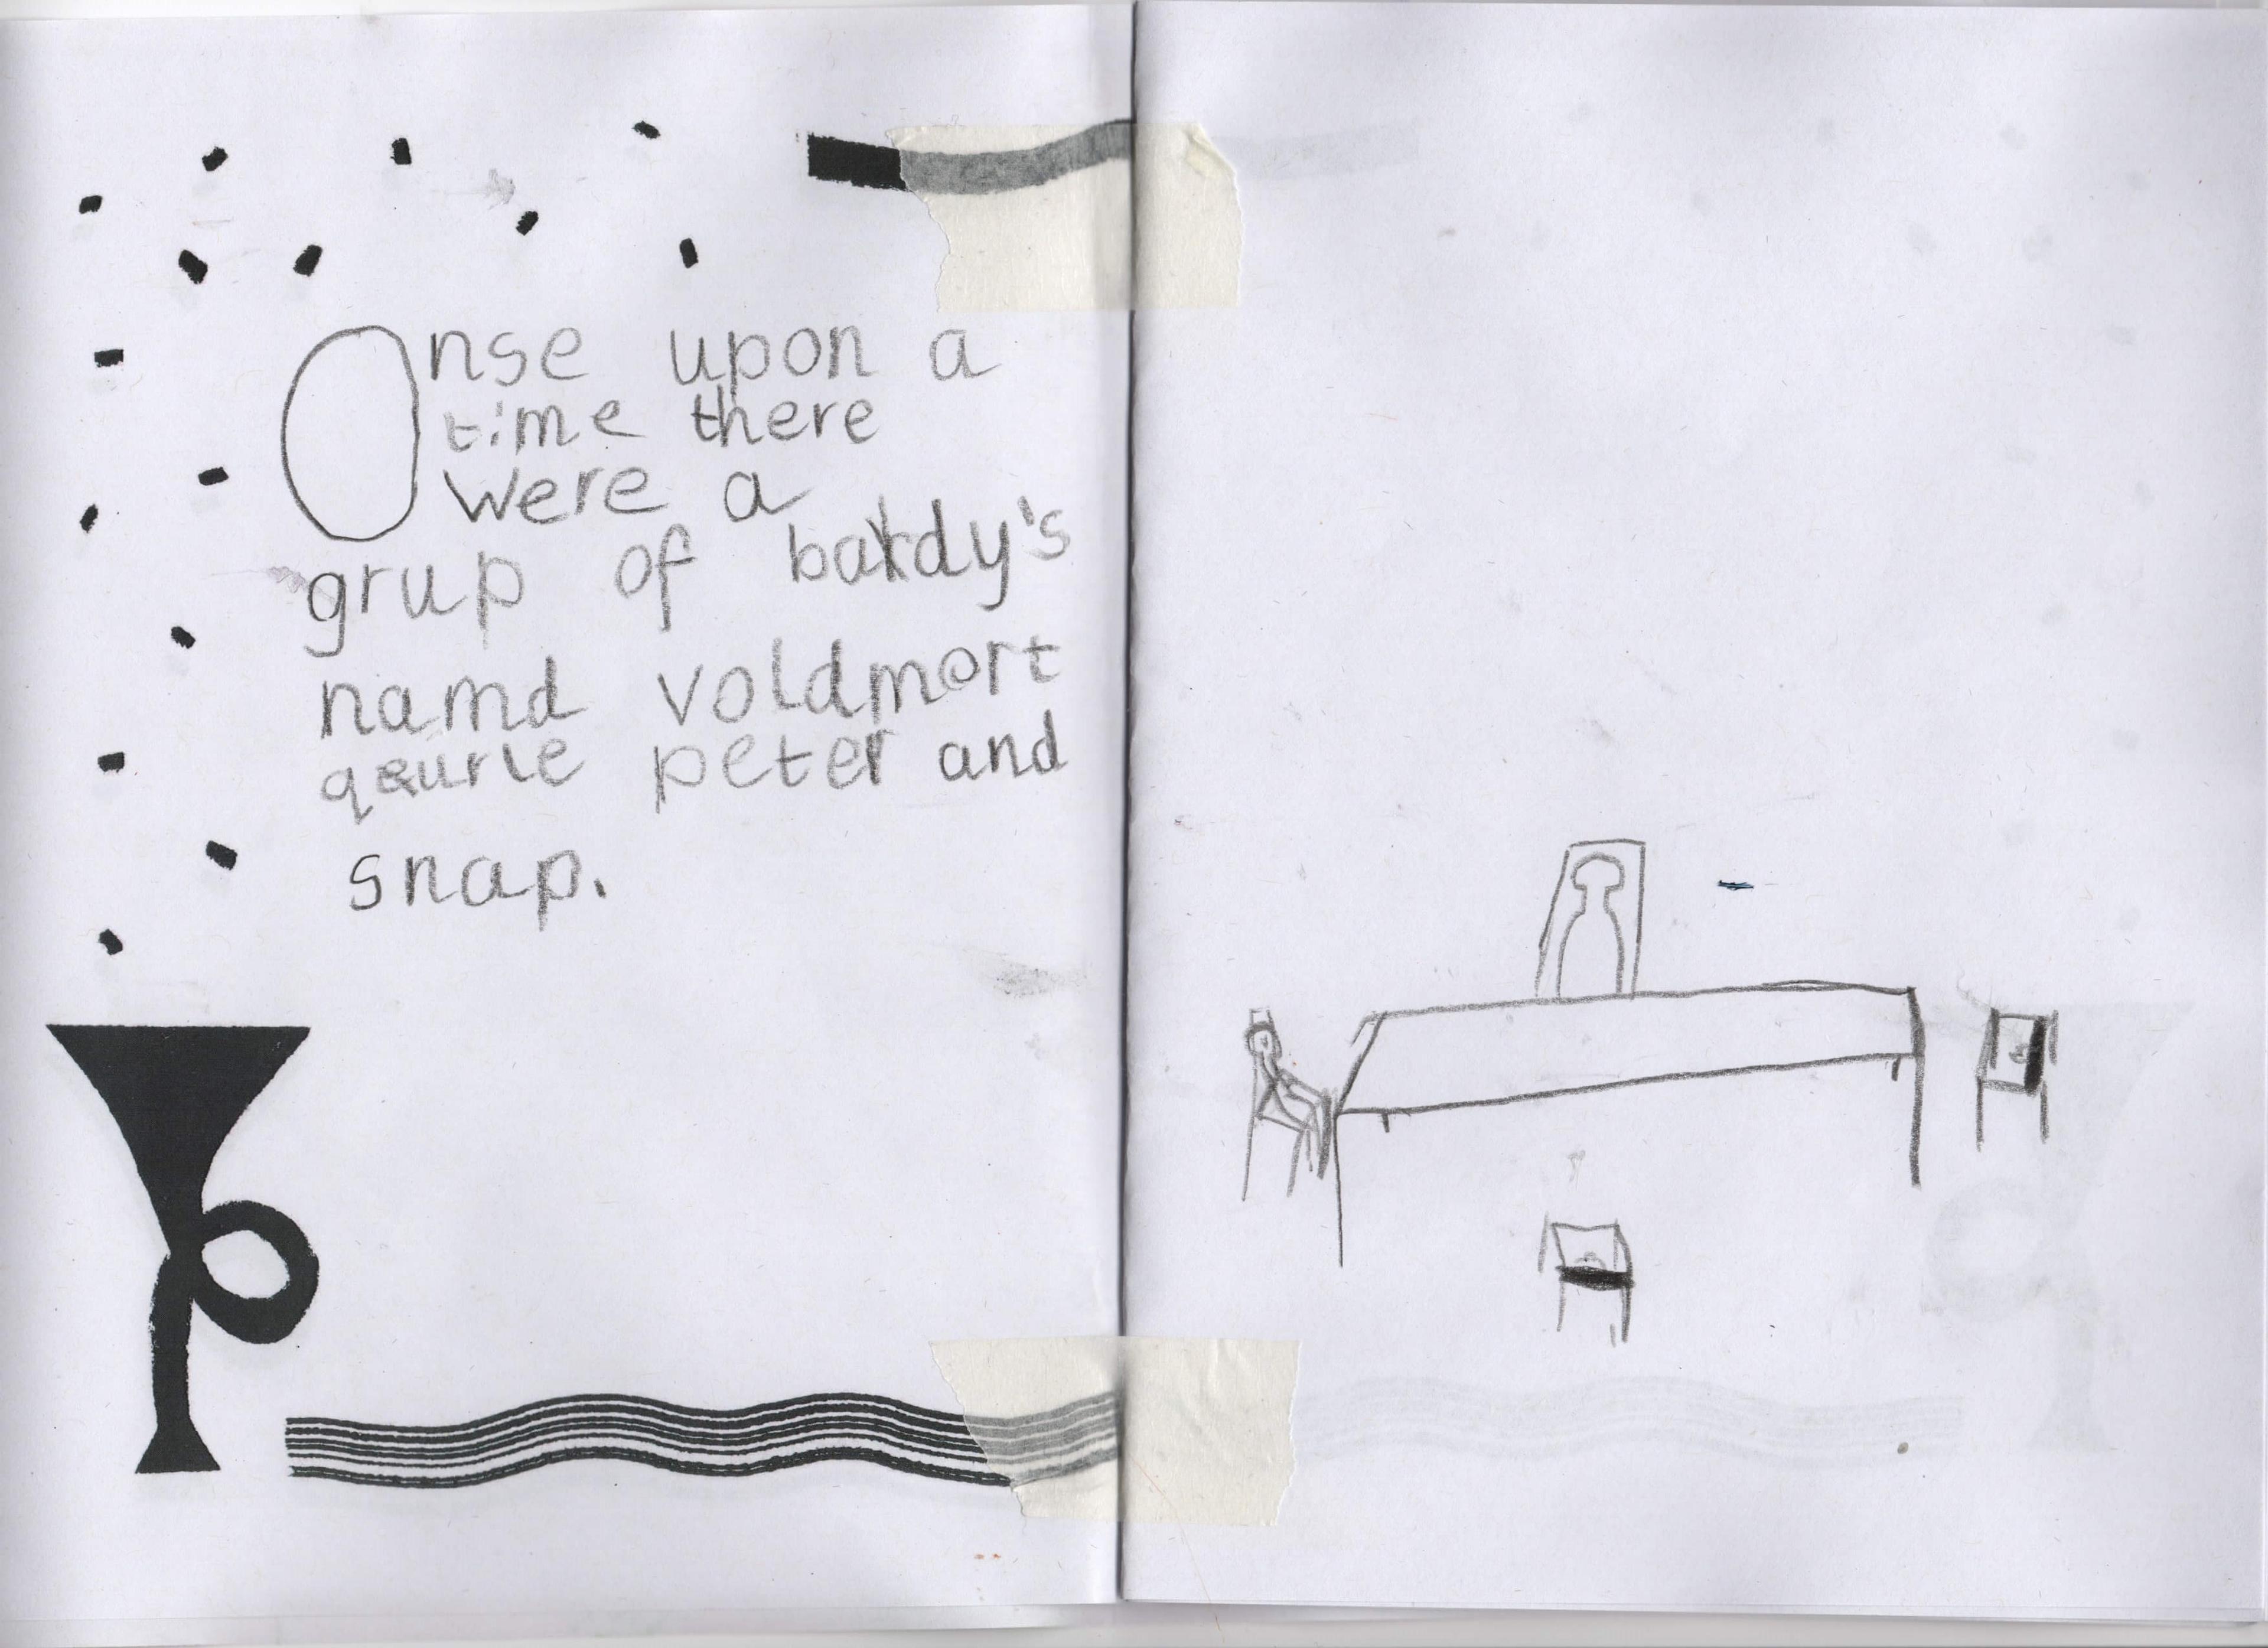 Inside page of a mock book spread. The page on the right has a simple pencil drawing of people sitting around a large dining table. The page on the left reads: "Onse upon a time there were a grup of buddys named Voldemort Qeurl Peter and Snap."